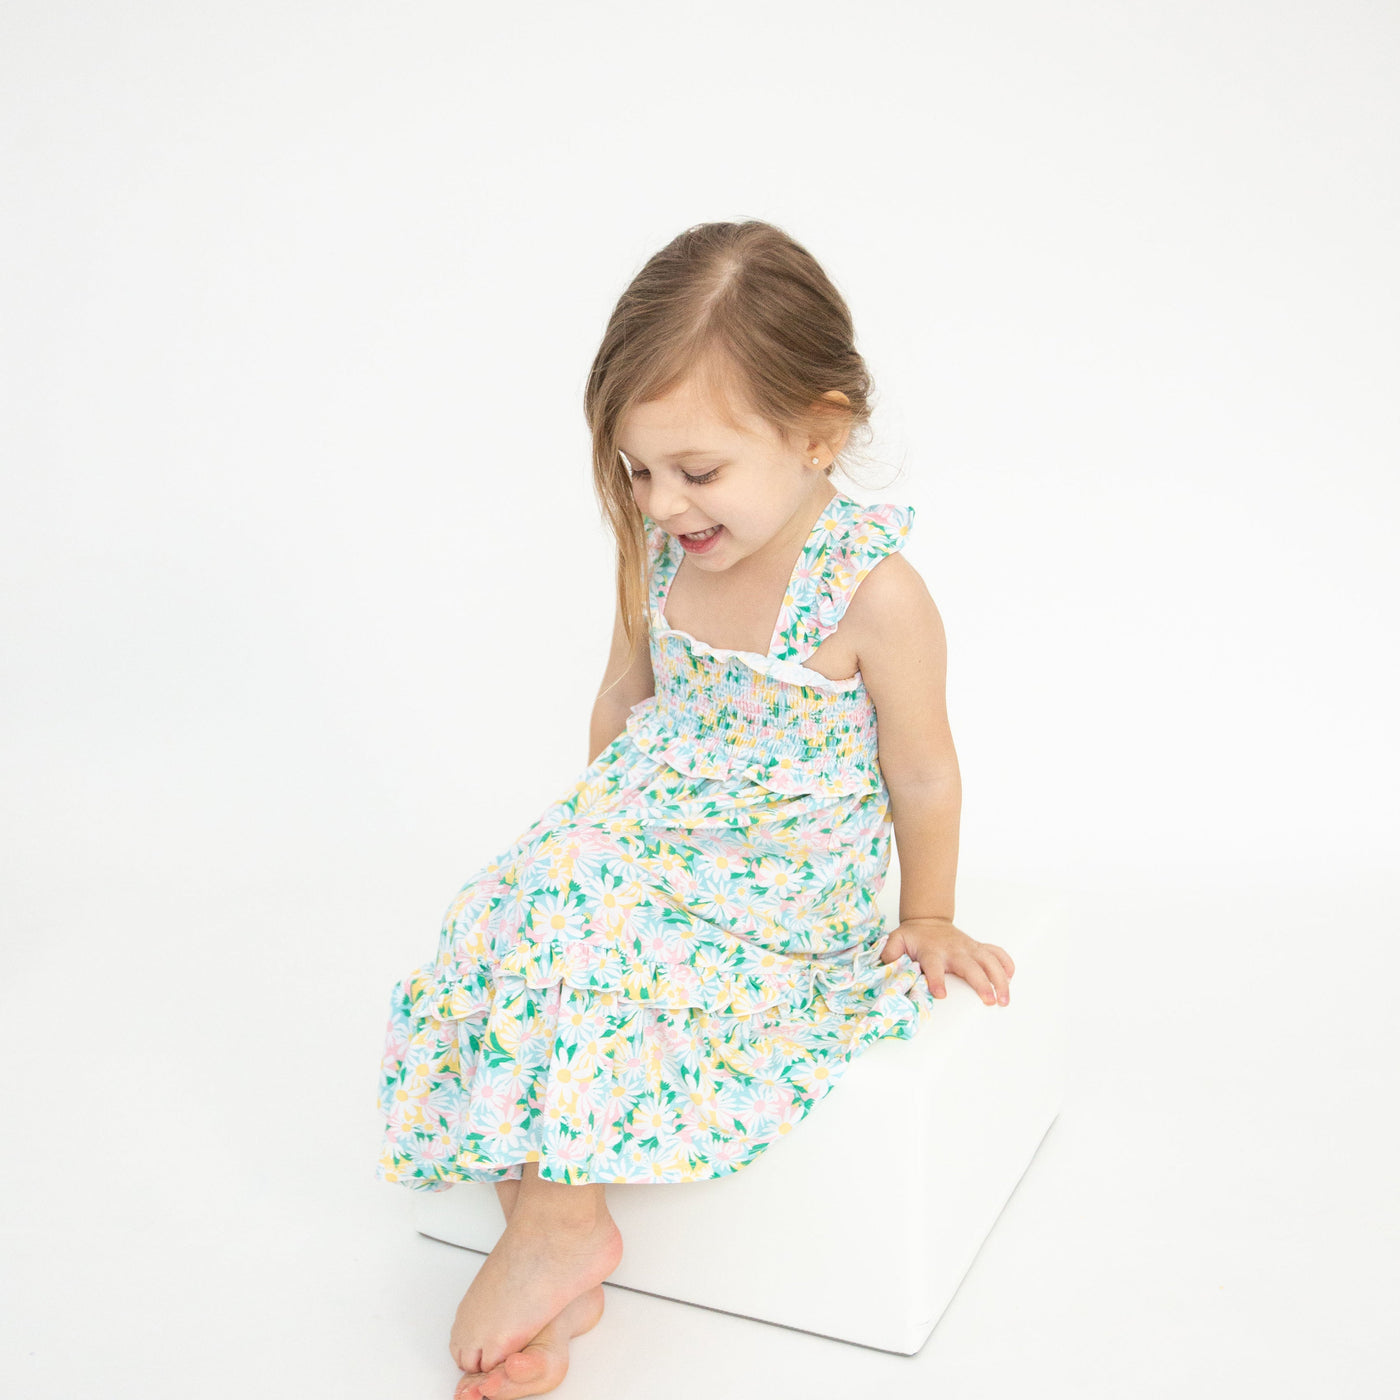 Smocked Ruffle Tiered Sundress - Color Fill Daisies - Angel Dear